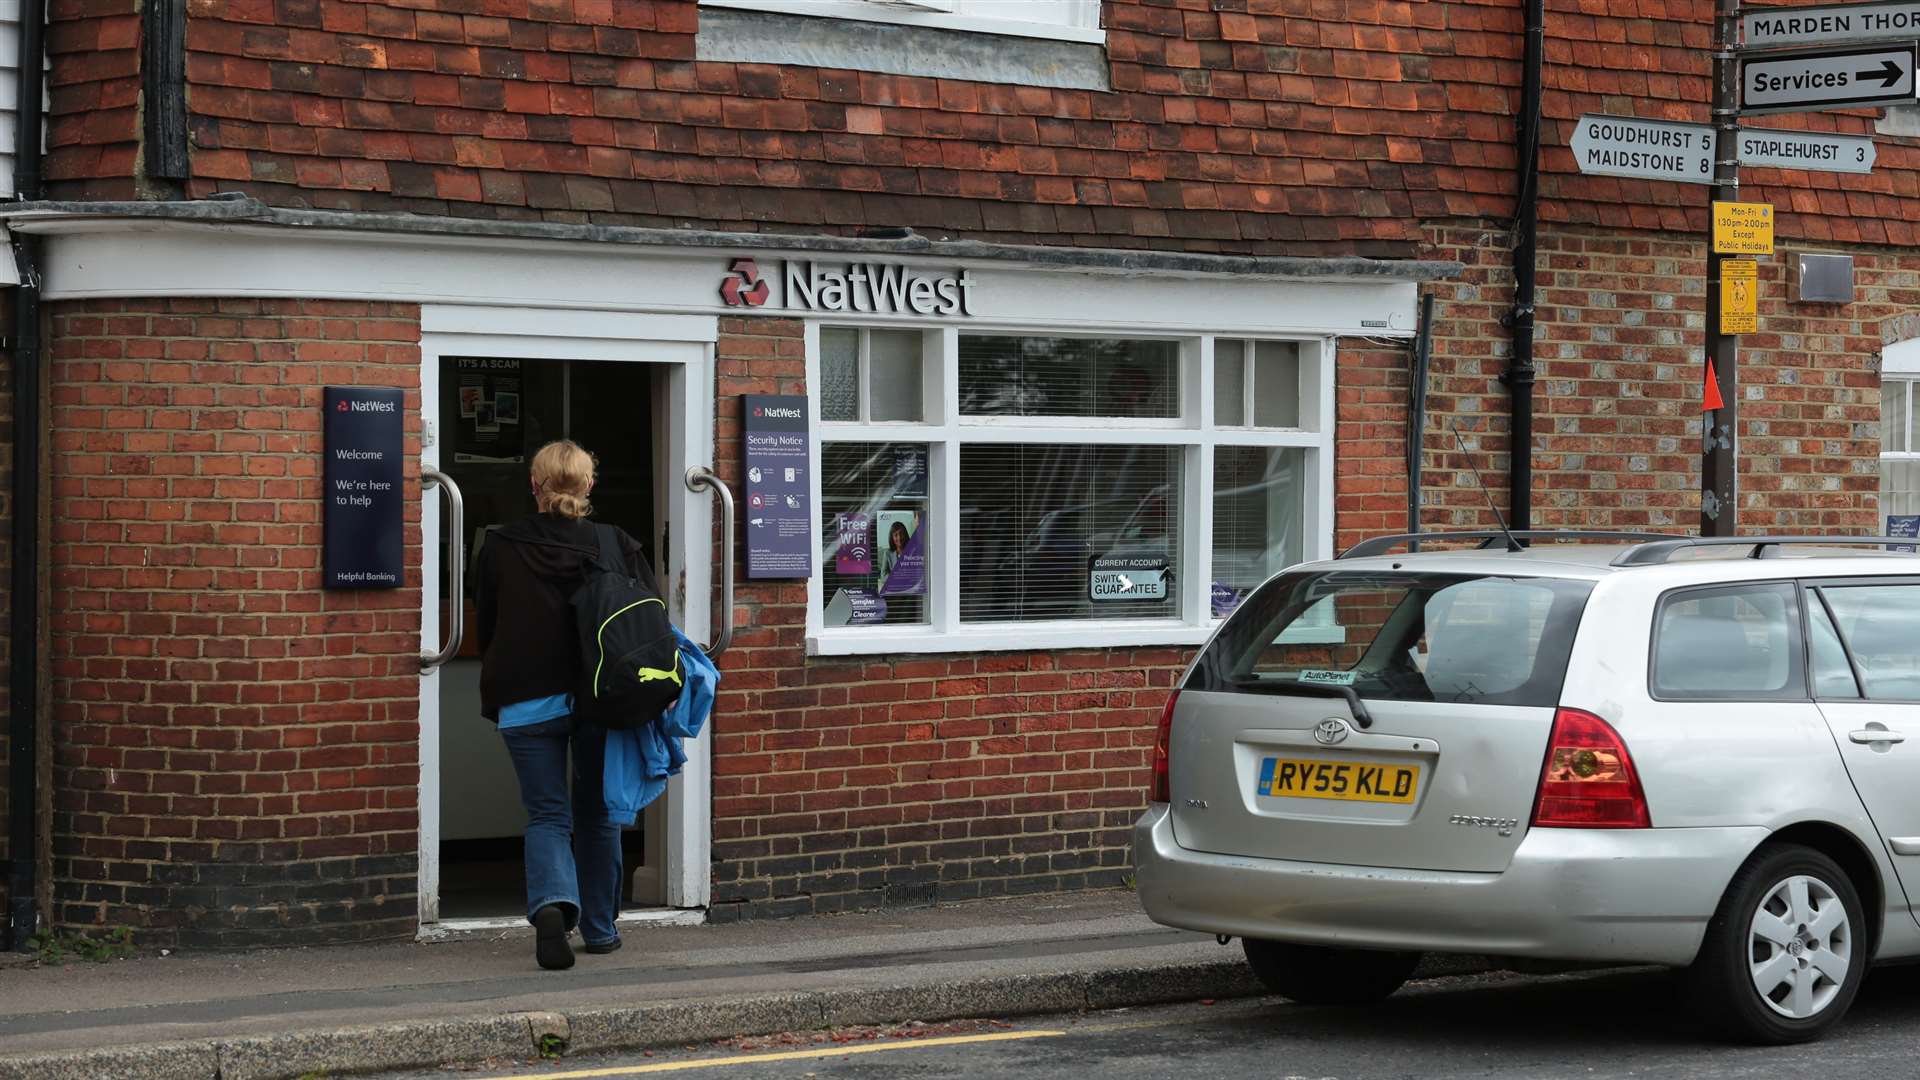 The NatWest branch in Marden will close in 11 days